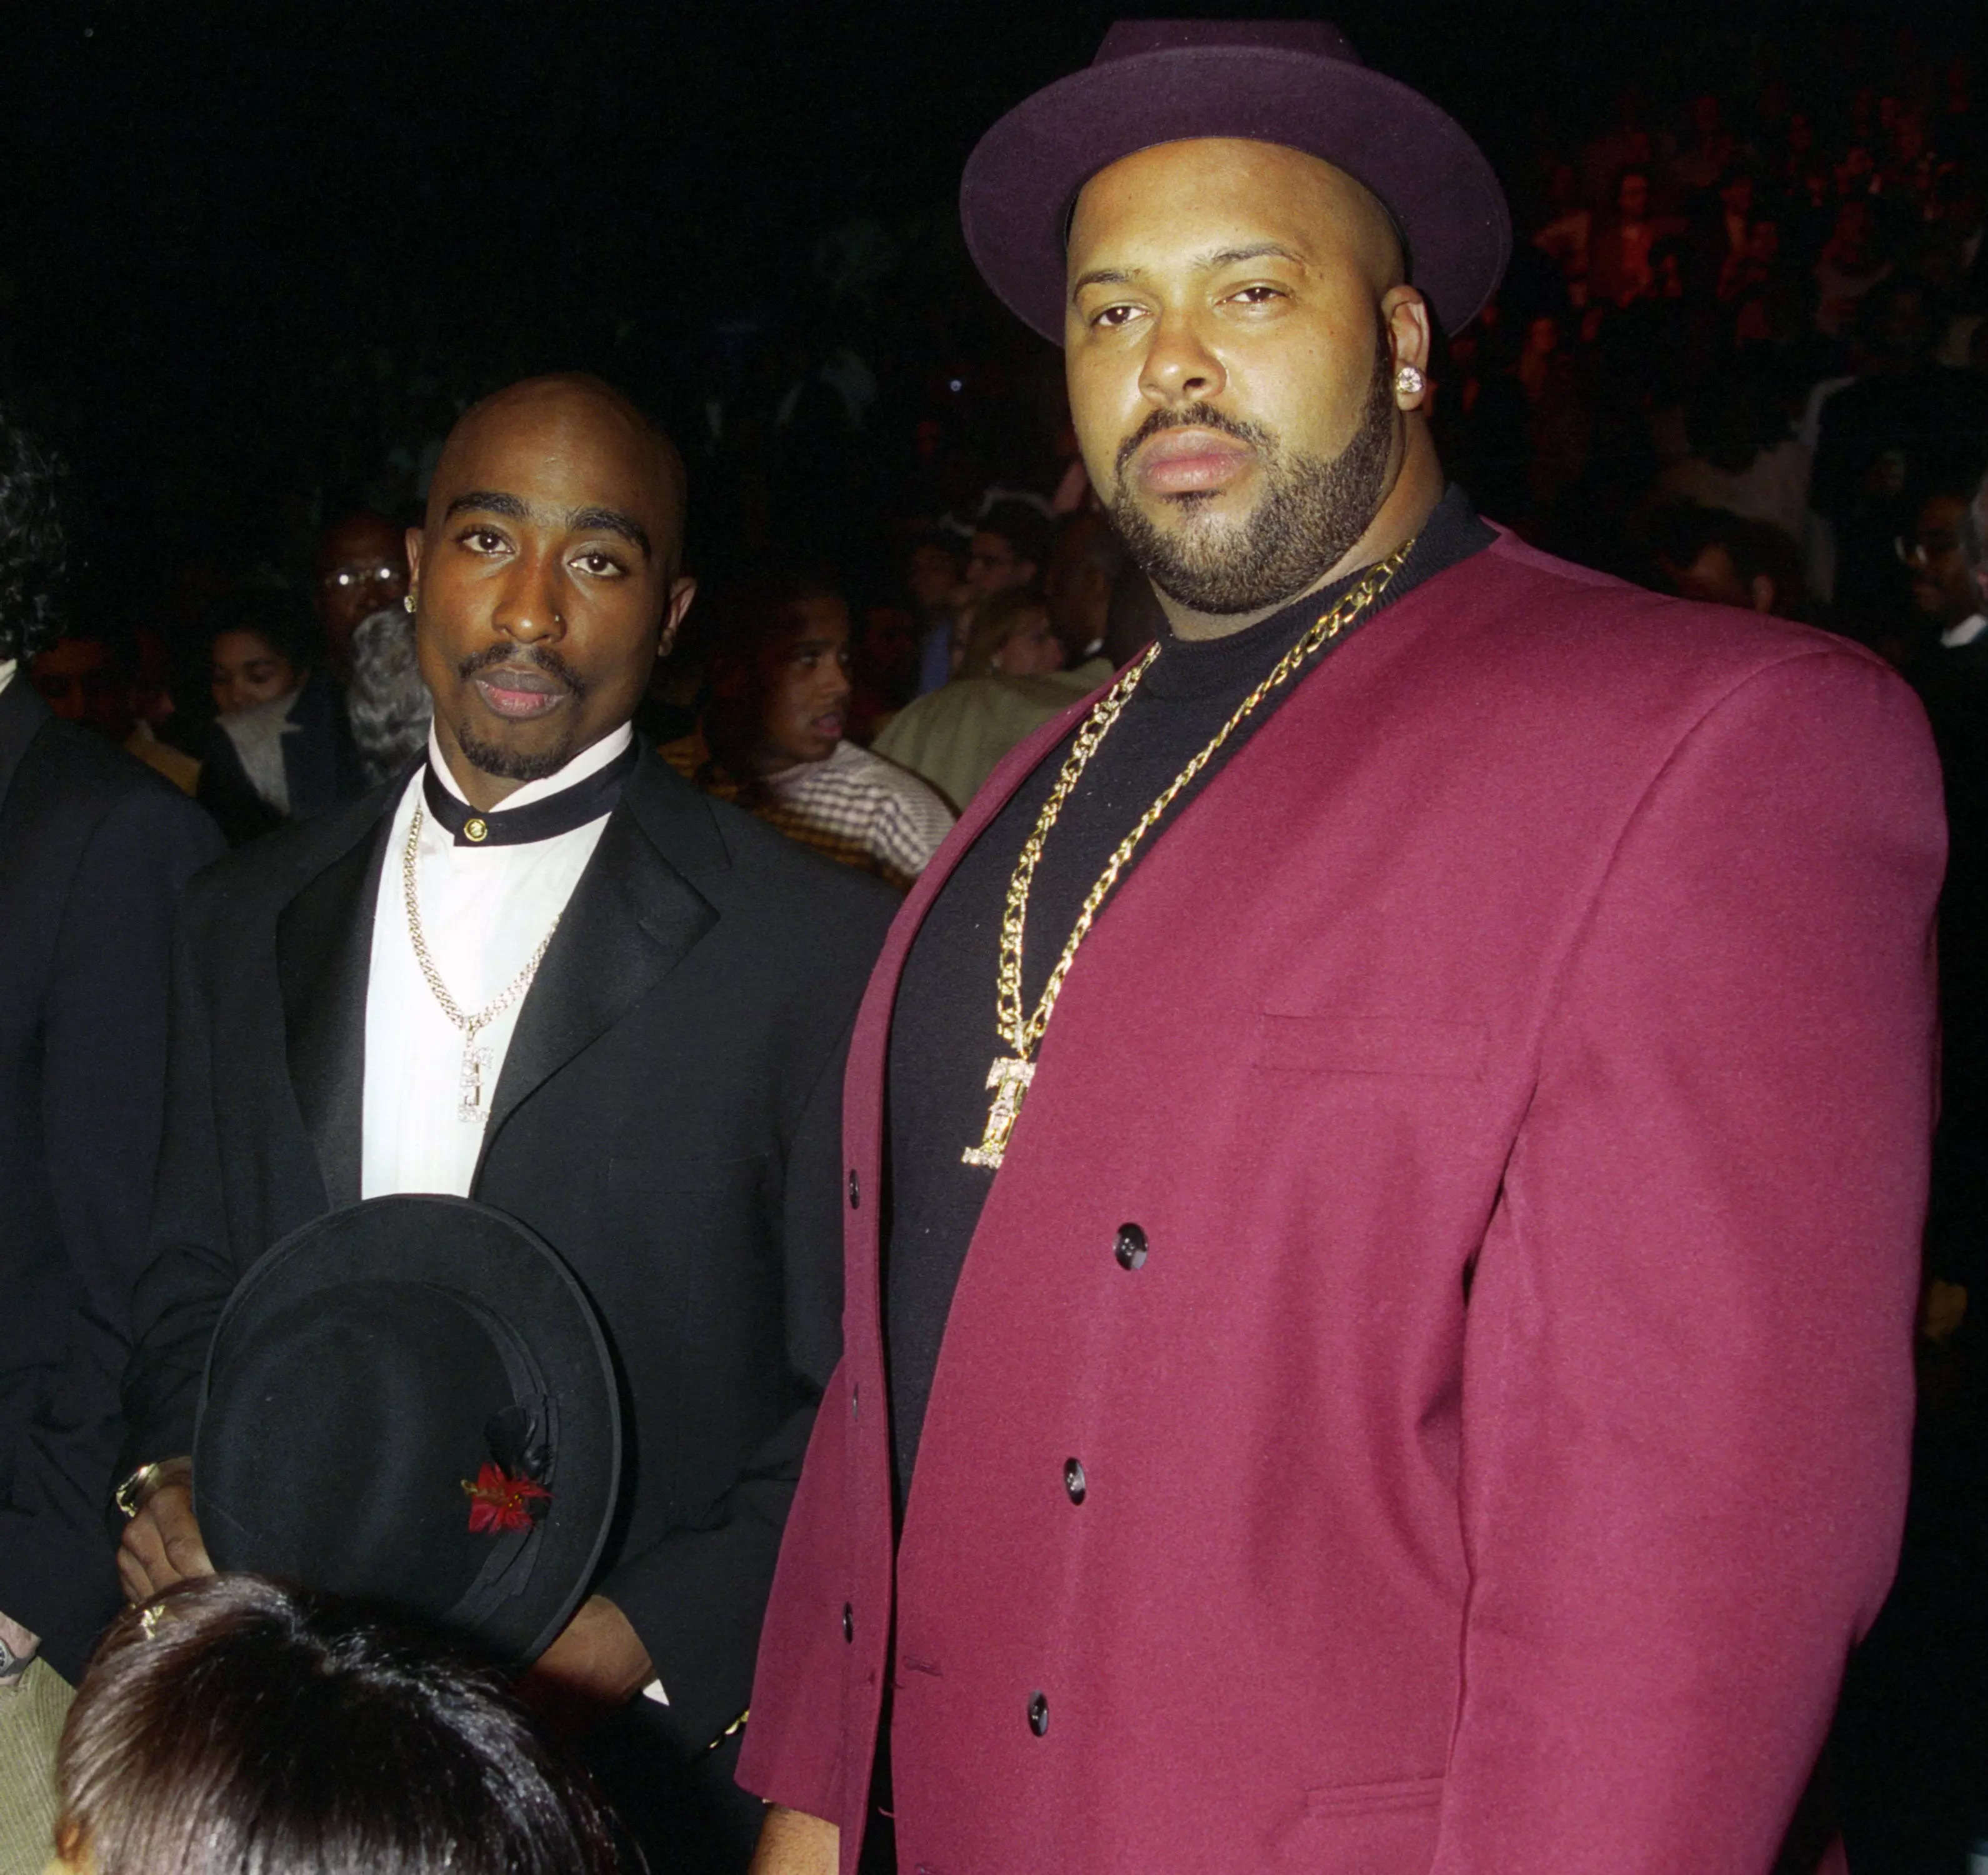 Tupac Shakur and Marion "Suge" Knight at the MGM Grand in Las Vegas several months before the rapper